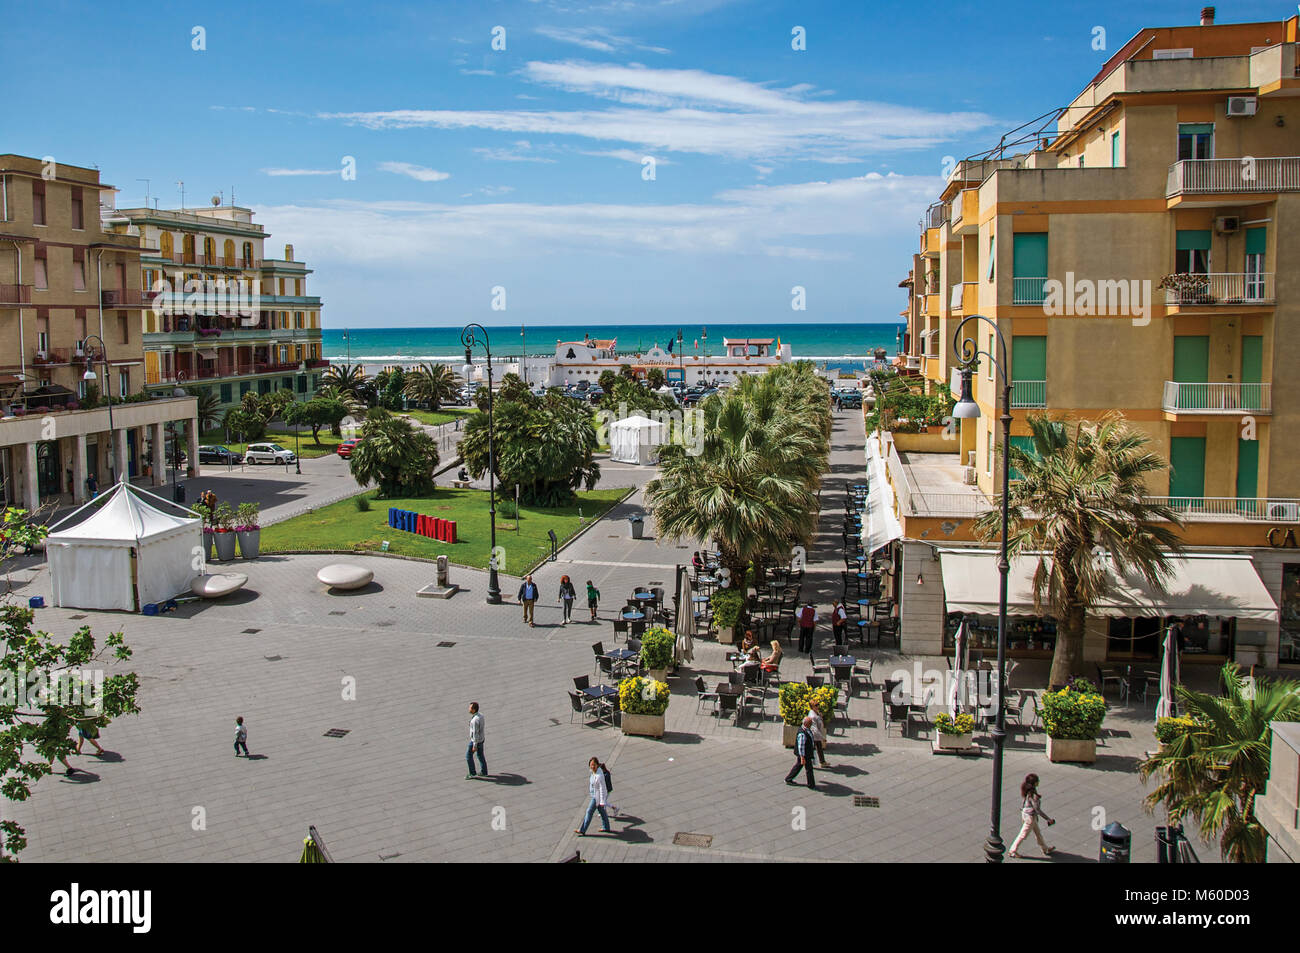 Ostia, Italy. Piazza Anco Marzio, the main square of Ostia, with the Mediterranean sea. The town is a seaside resort and ancient port of Rome. Stock Photo